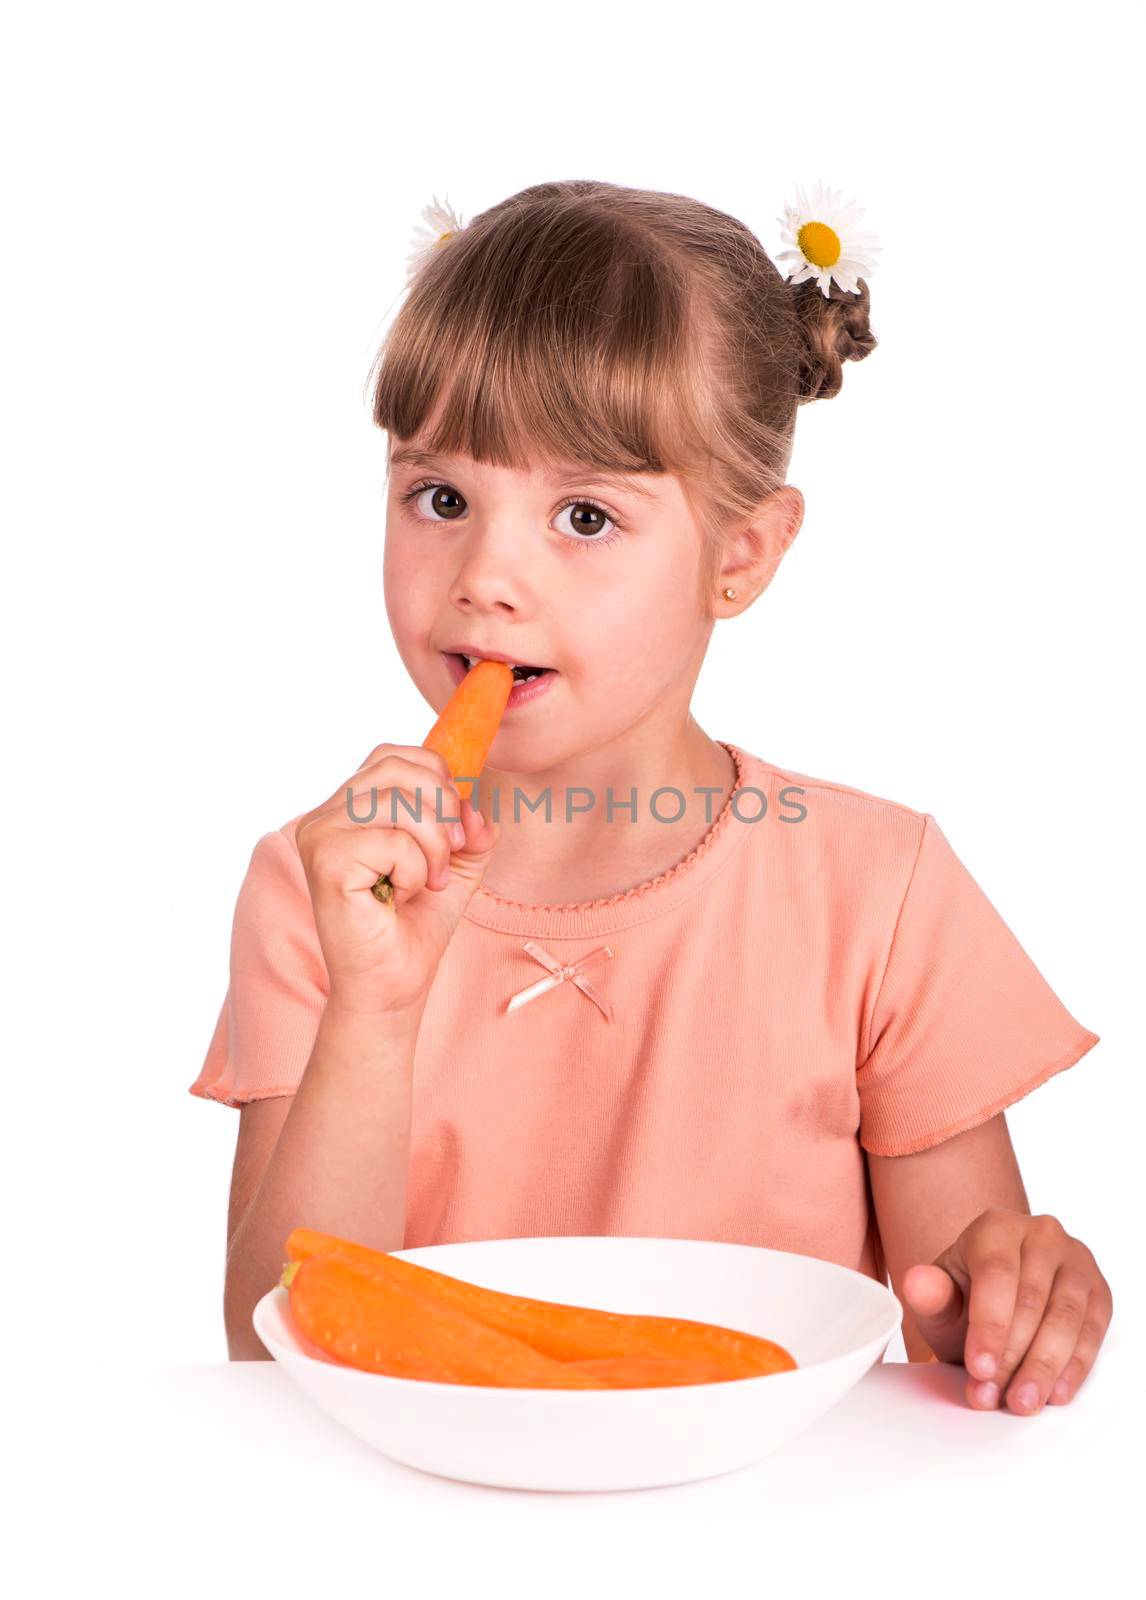 Cute little girl with the carrot on a white background by aprilphoto